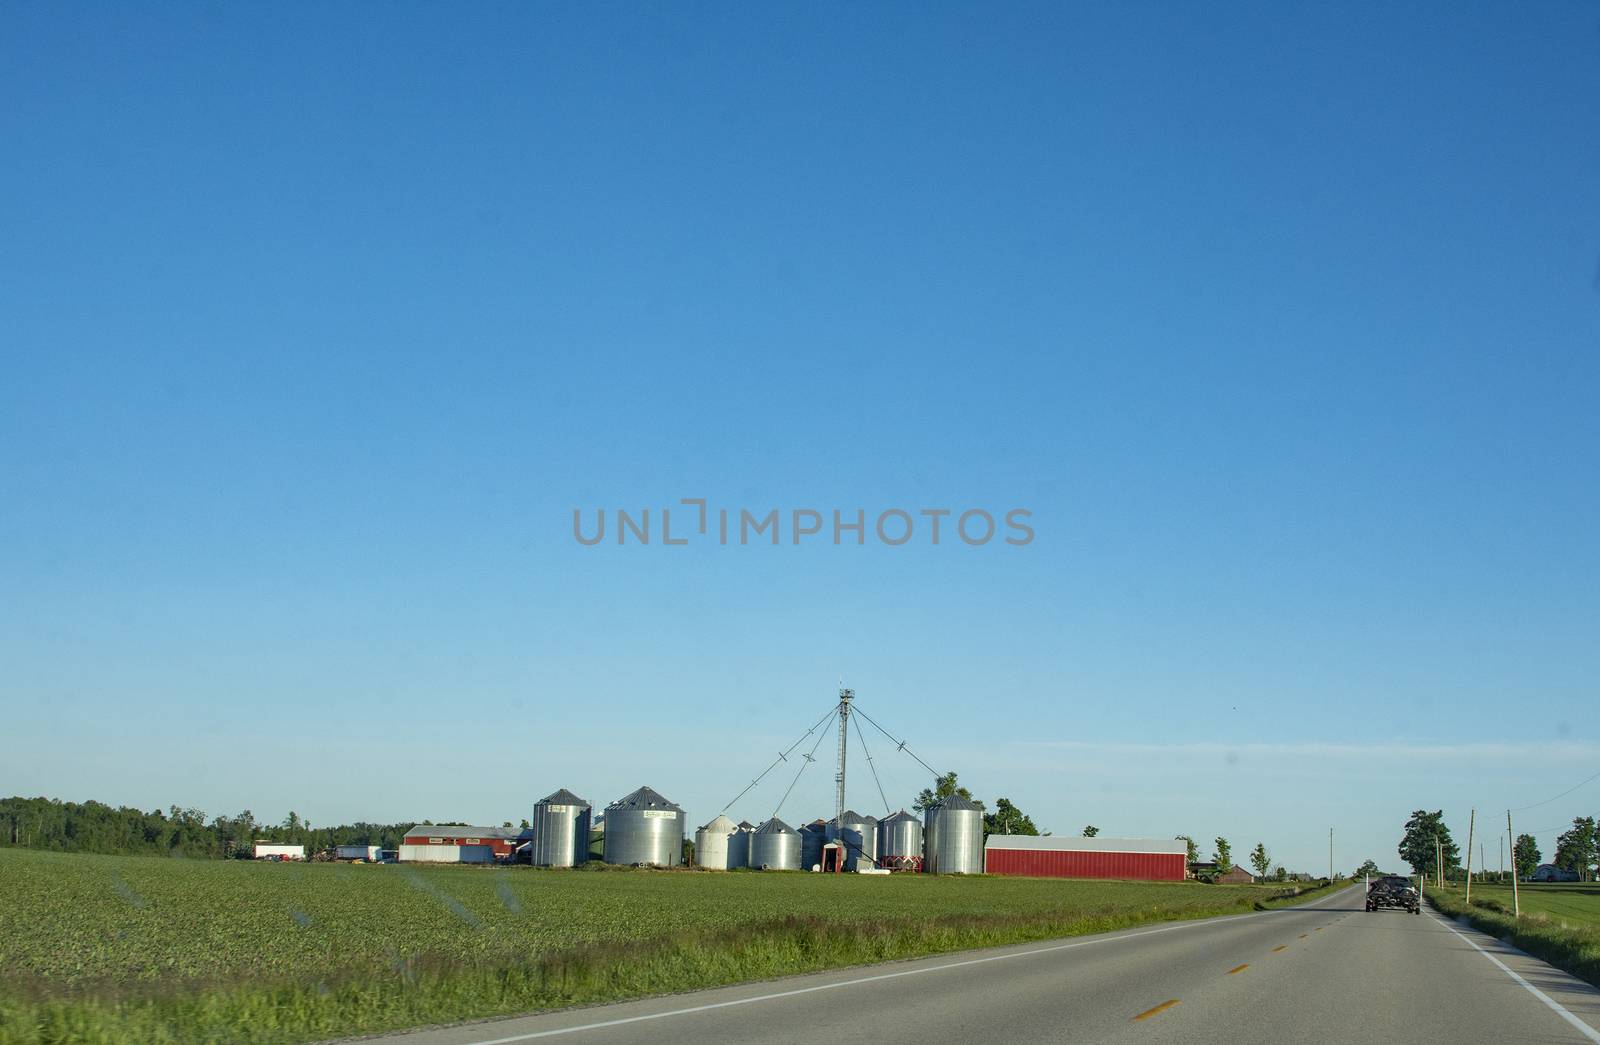 Farm buildings at the end of a large field that stretches along the road